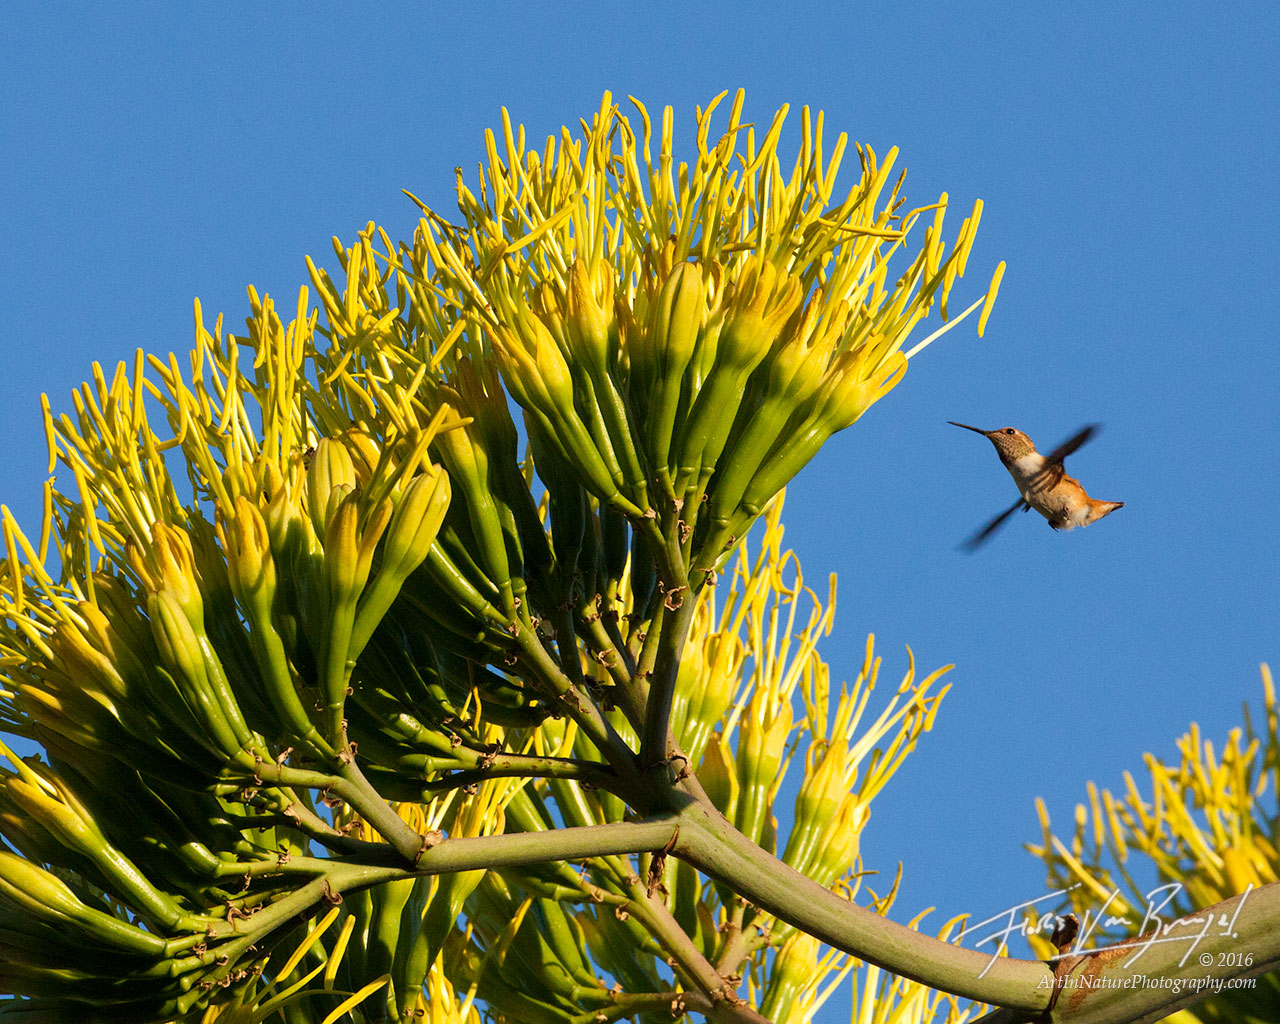 A young Rufous Hummingbird&nbsp;feeding from the prolific blooms from this flowering century plant (Agave americana).